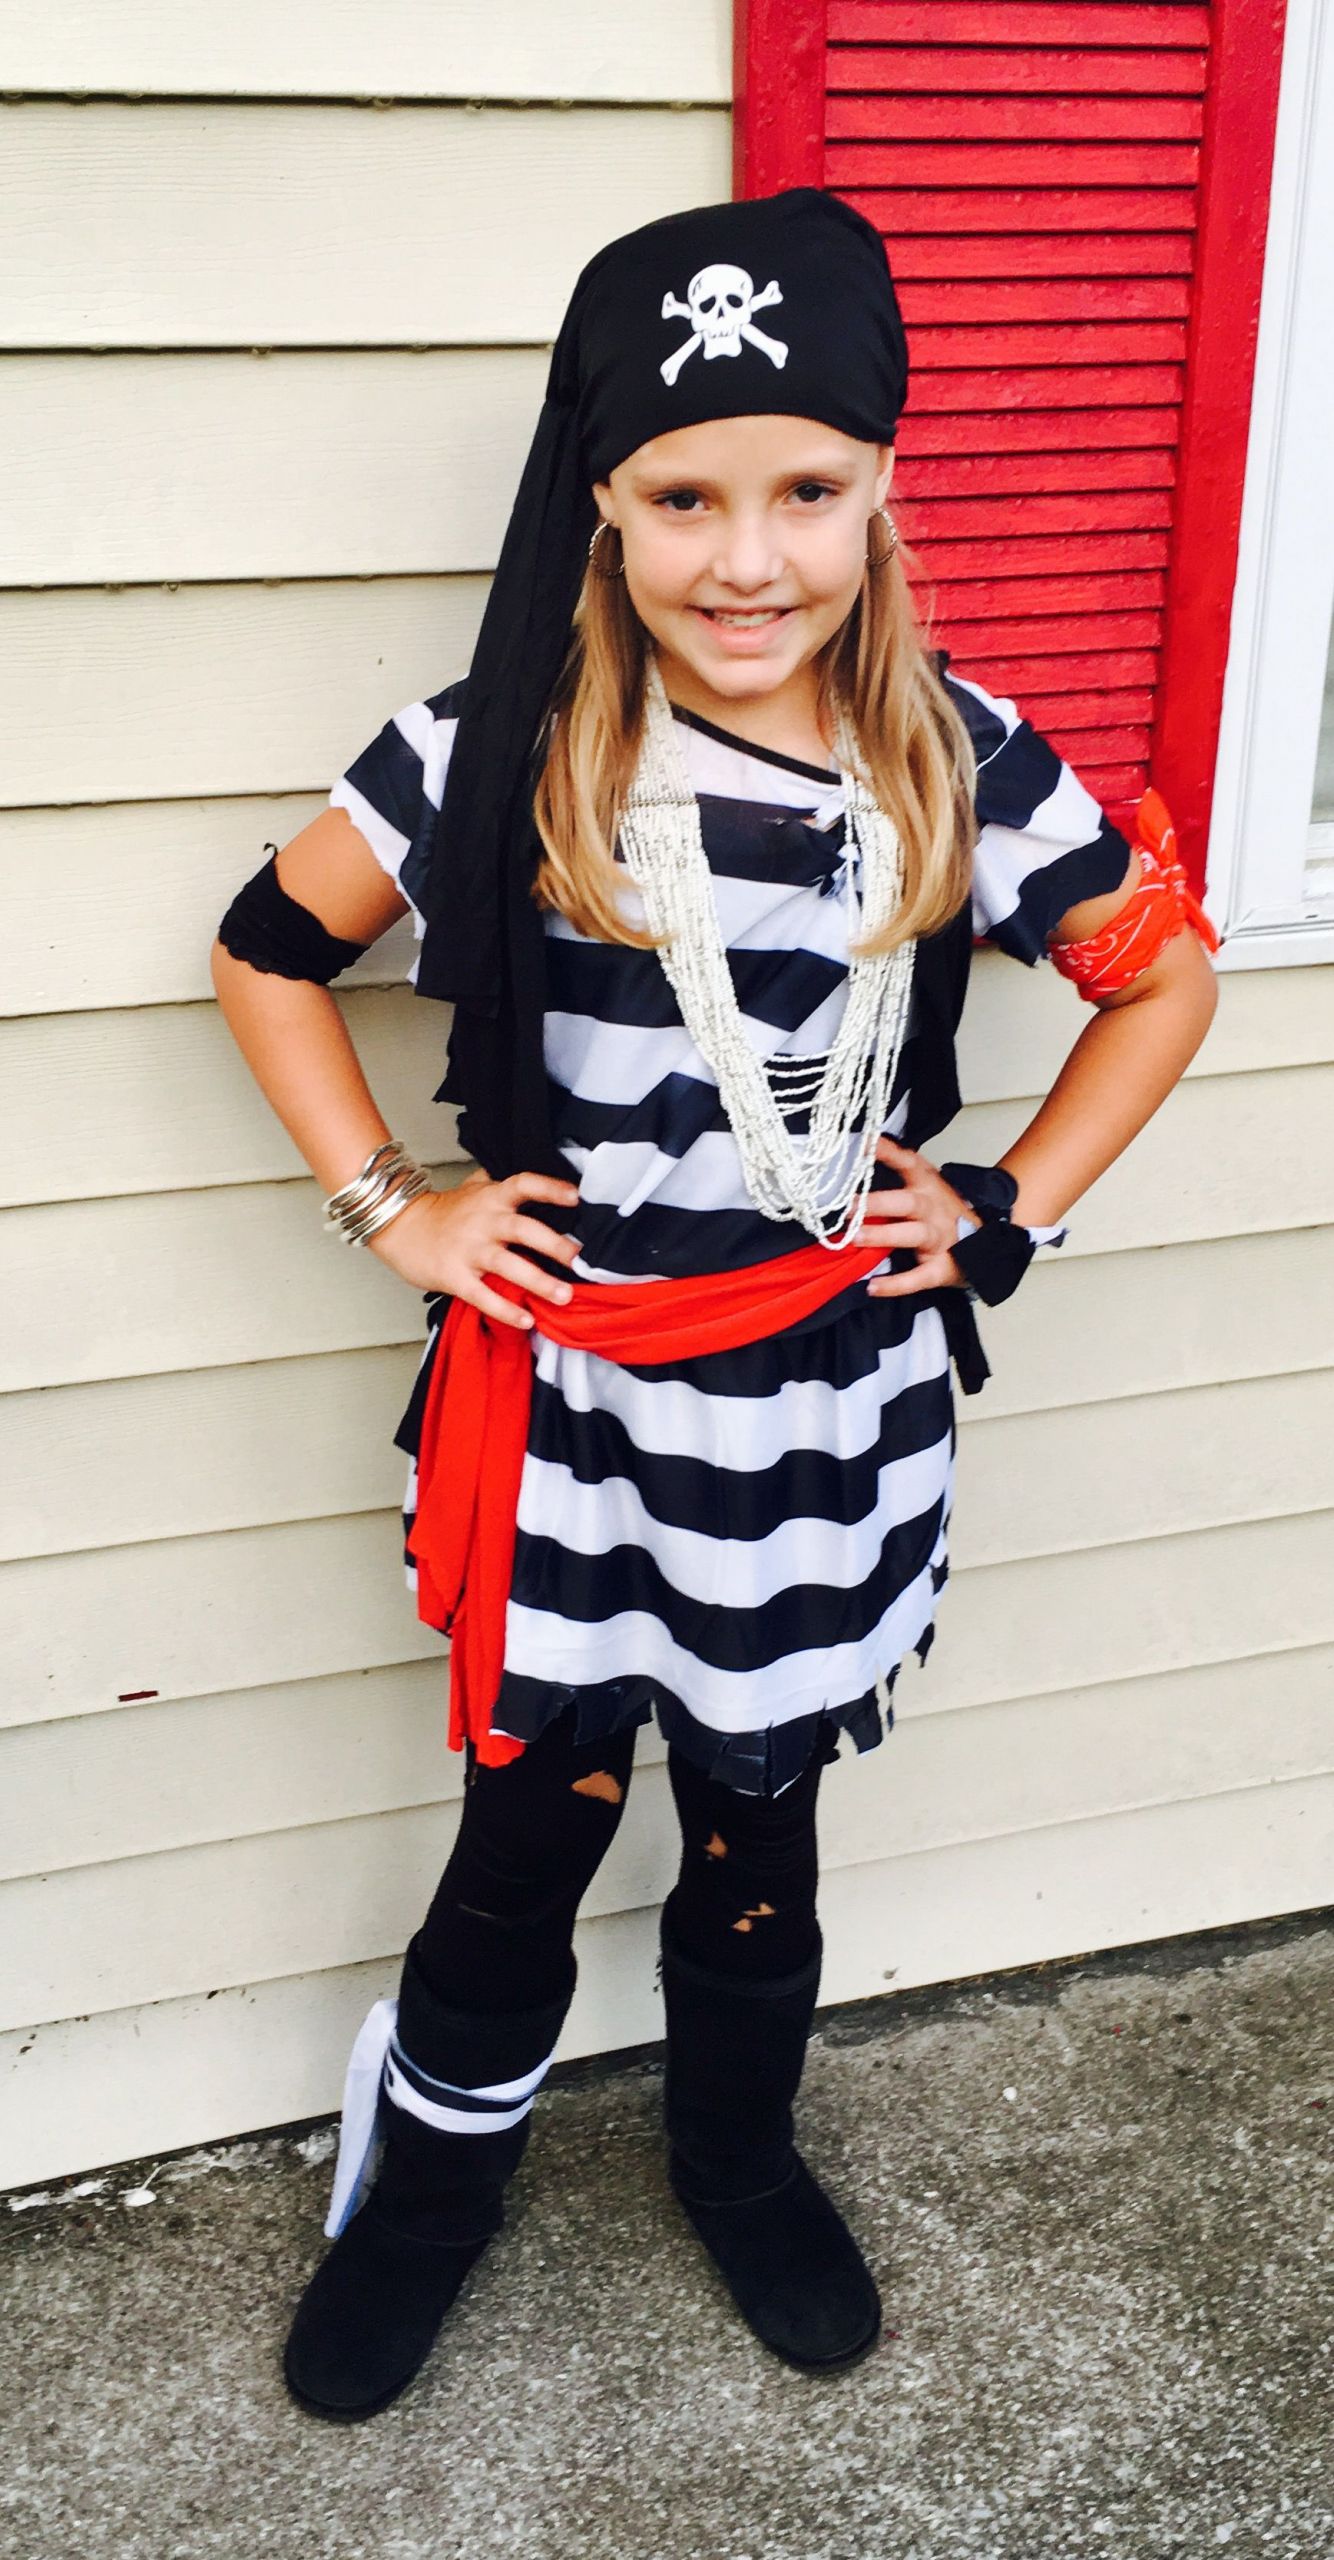 Woman Pirate Costume DIY
 Easy girl s pirate costume made from cheap adult size